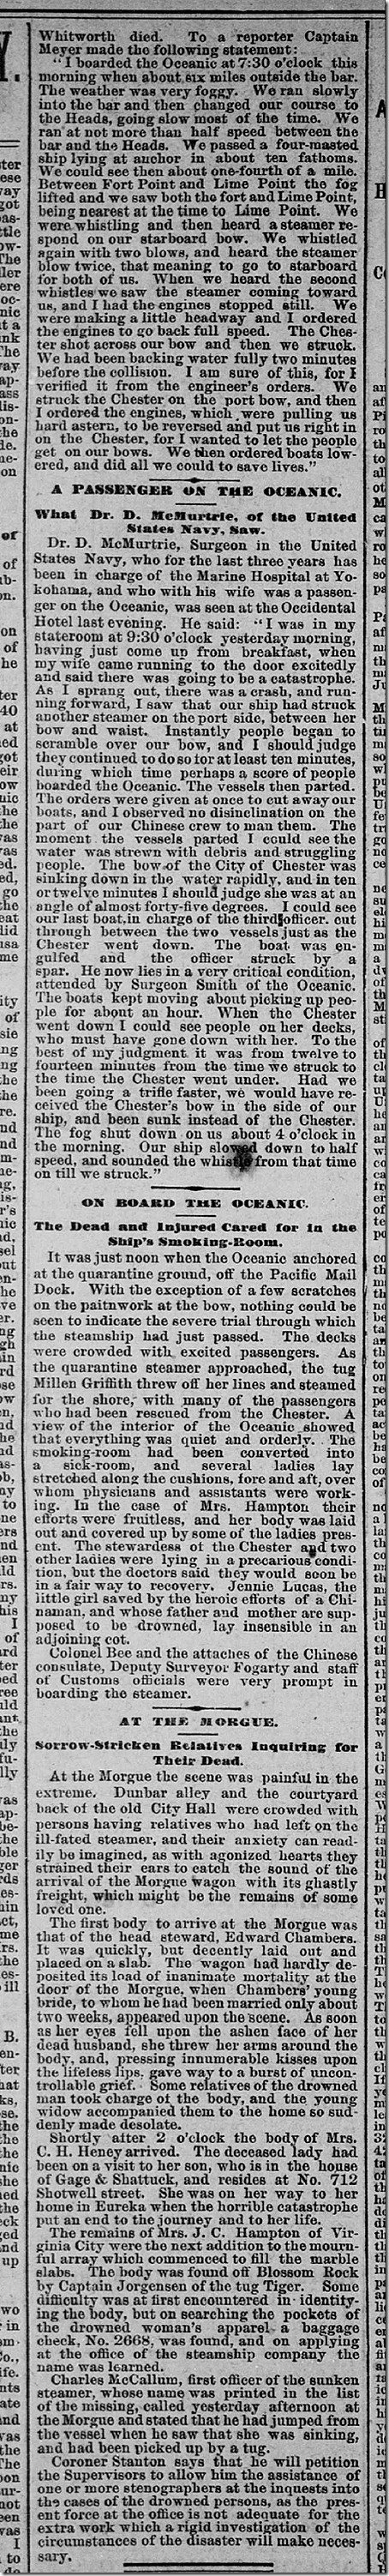 Aug. 23, 1888, City of Chester 